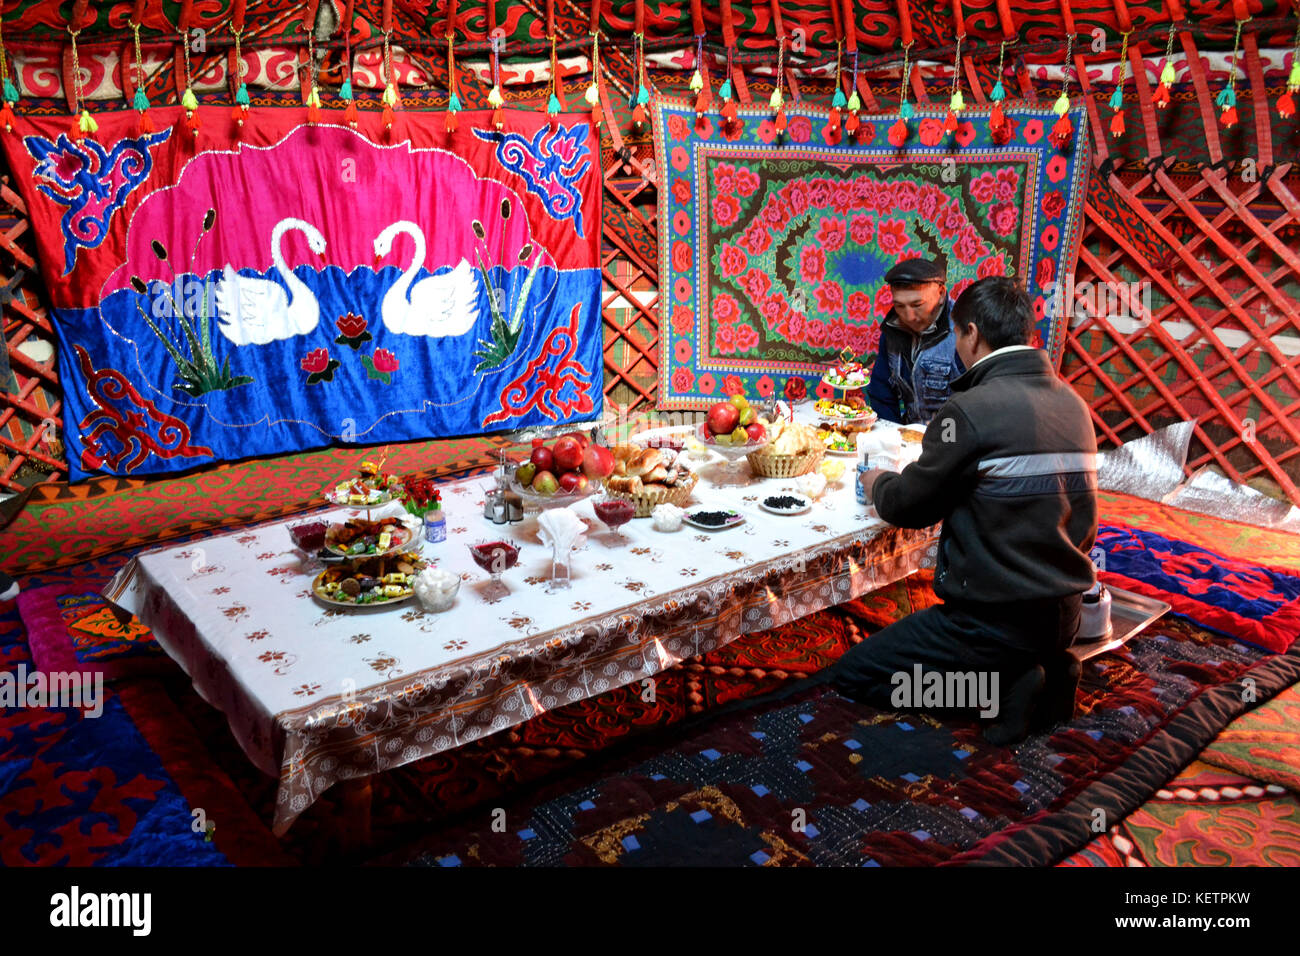 Pictures of the inside of a Yurt. Picture is very vibrant and colourful Stock Photo